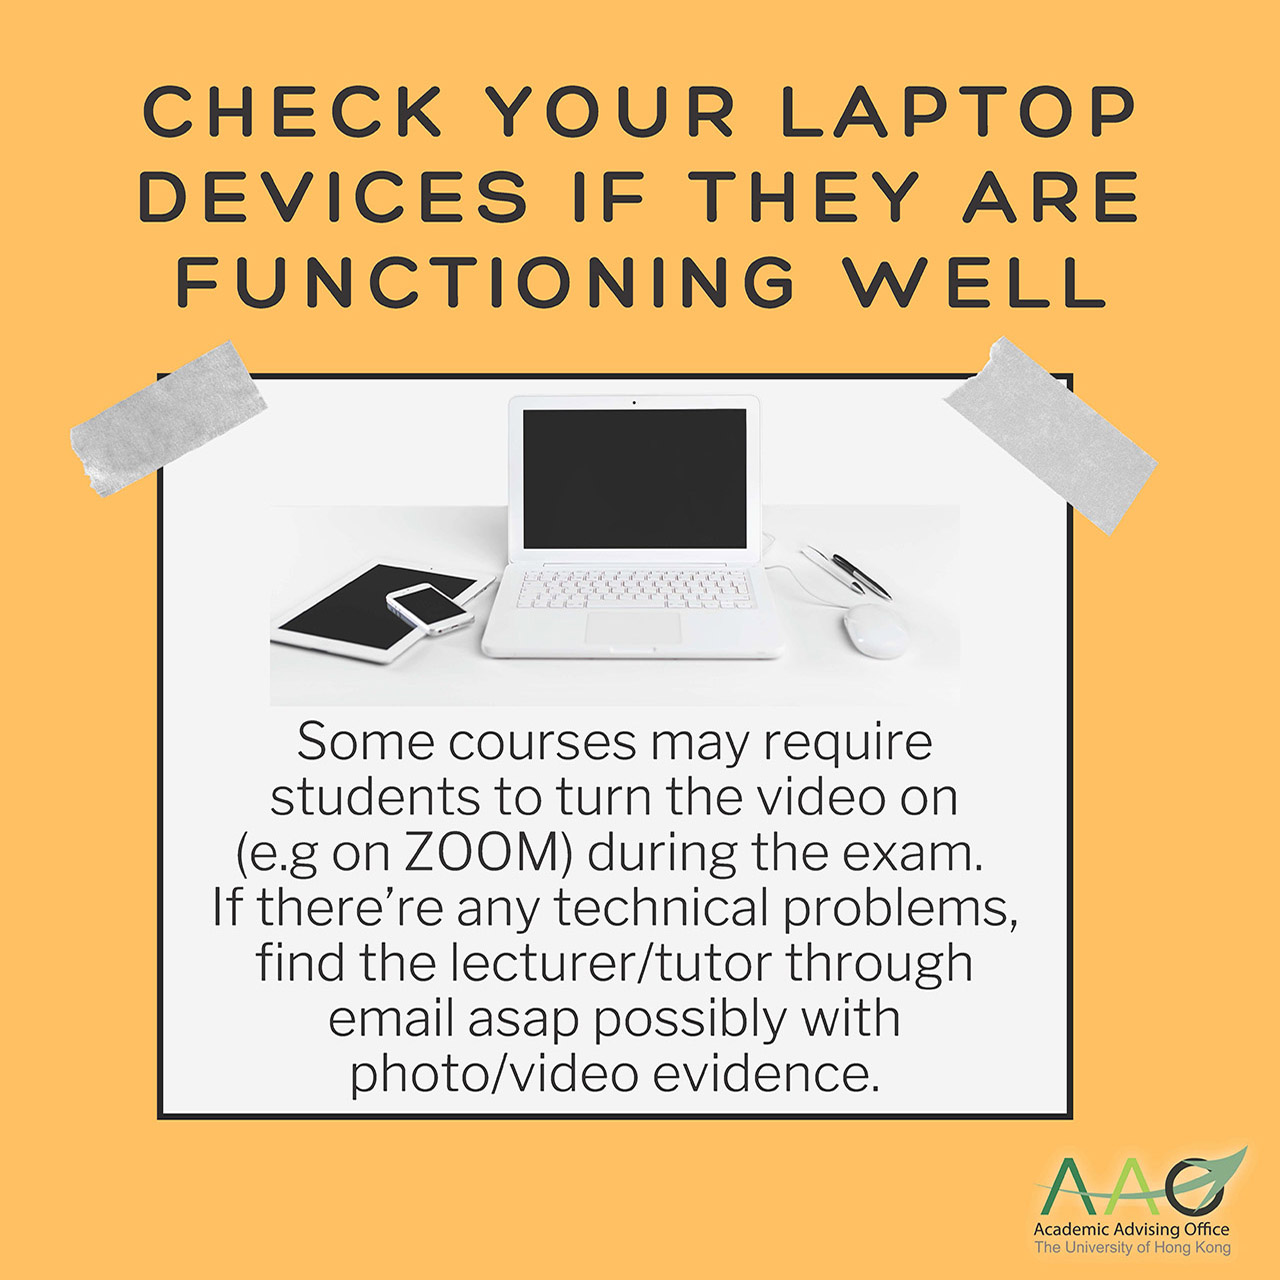 Check your laptop devices if they are functioning well. Some courses may require students to turn the video on (e.g on ZOOM) during the exam for teachers to monitor the process. If there're any problems (like technical failure/ accidents), find the lecturer/tutor through email asap possibly with photo/video evidence -- to ask for solutions and follow-up actions needed! Your teacher/tutor would be more than willing to help you through this hard situation.